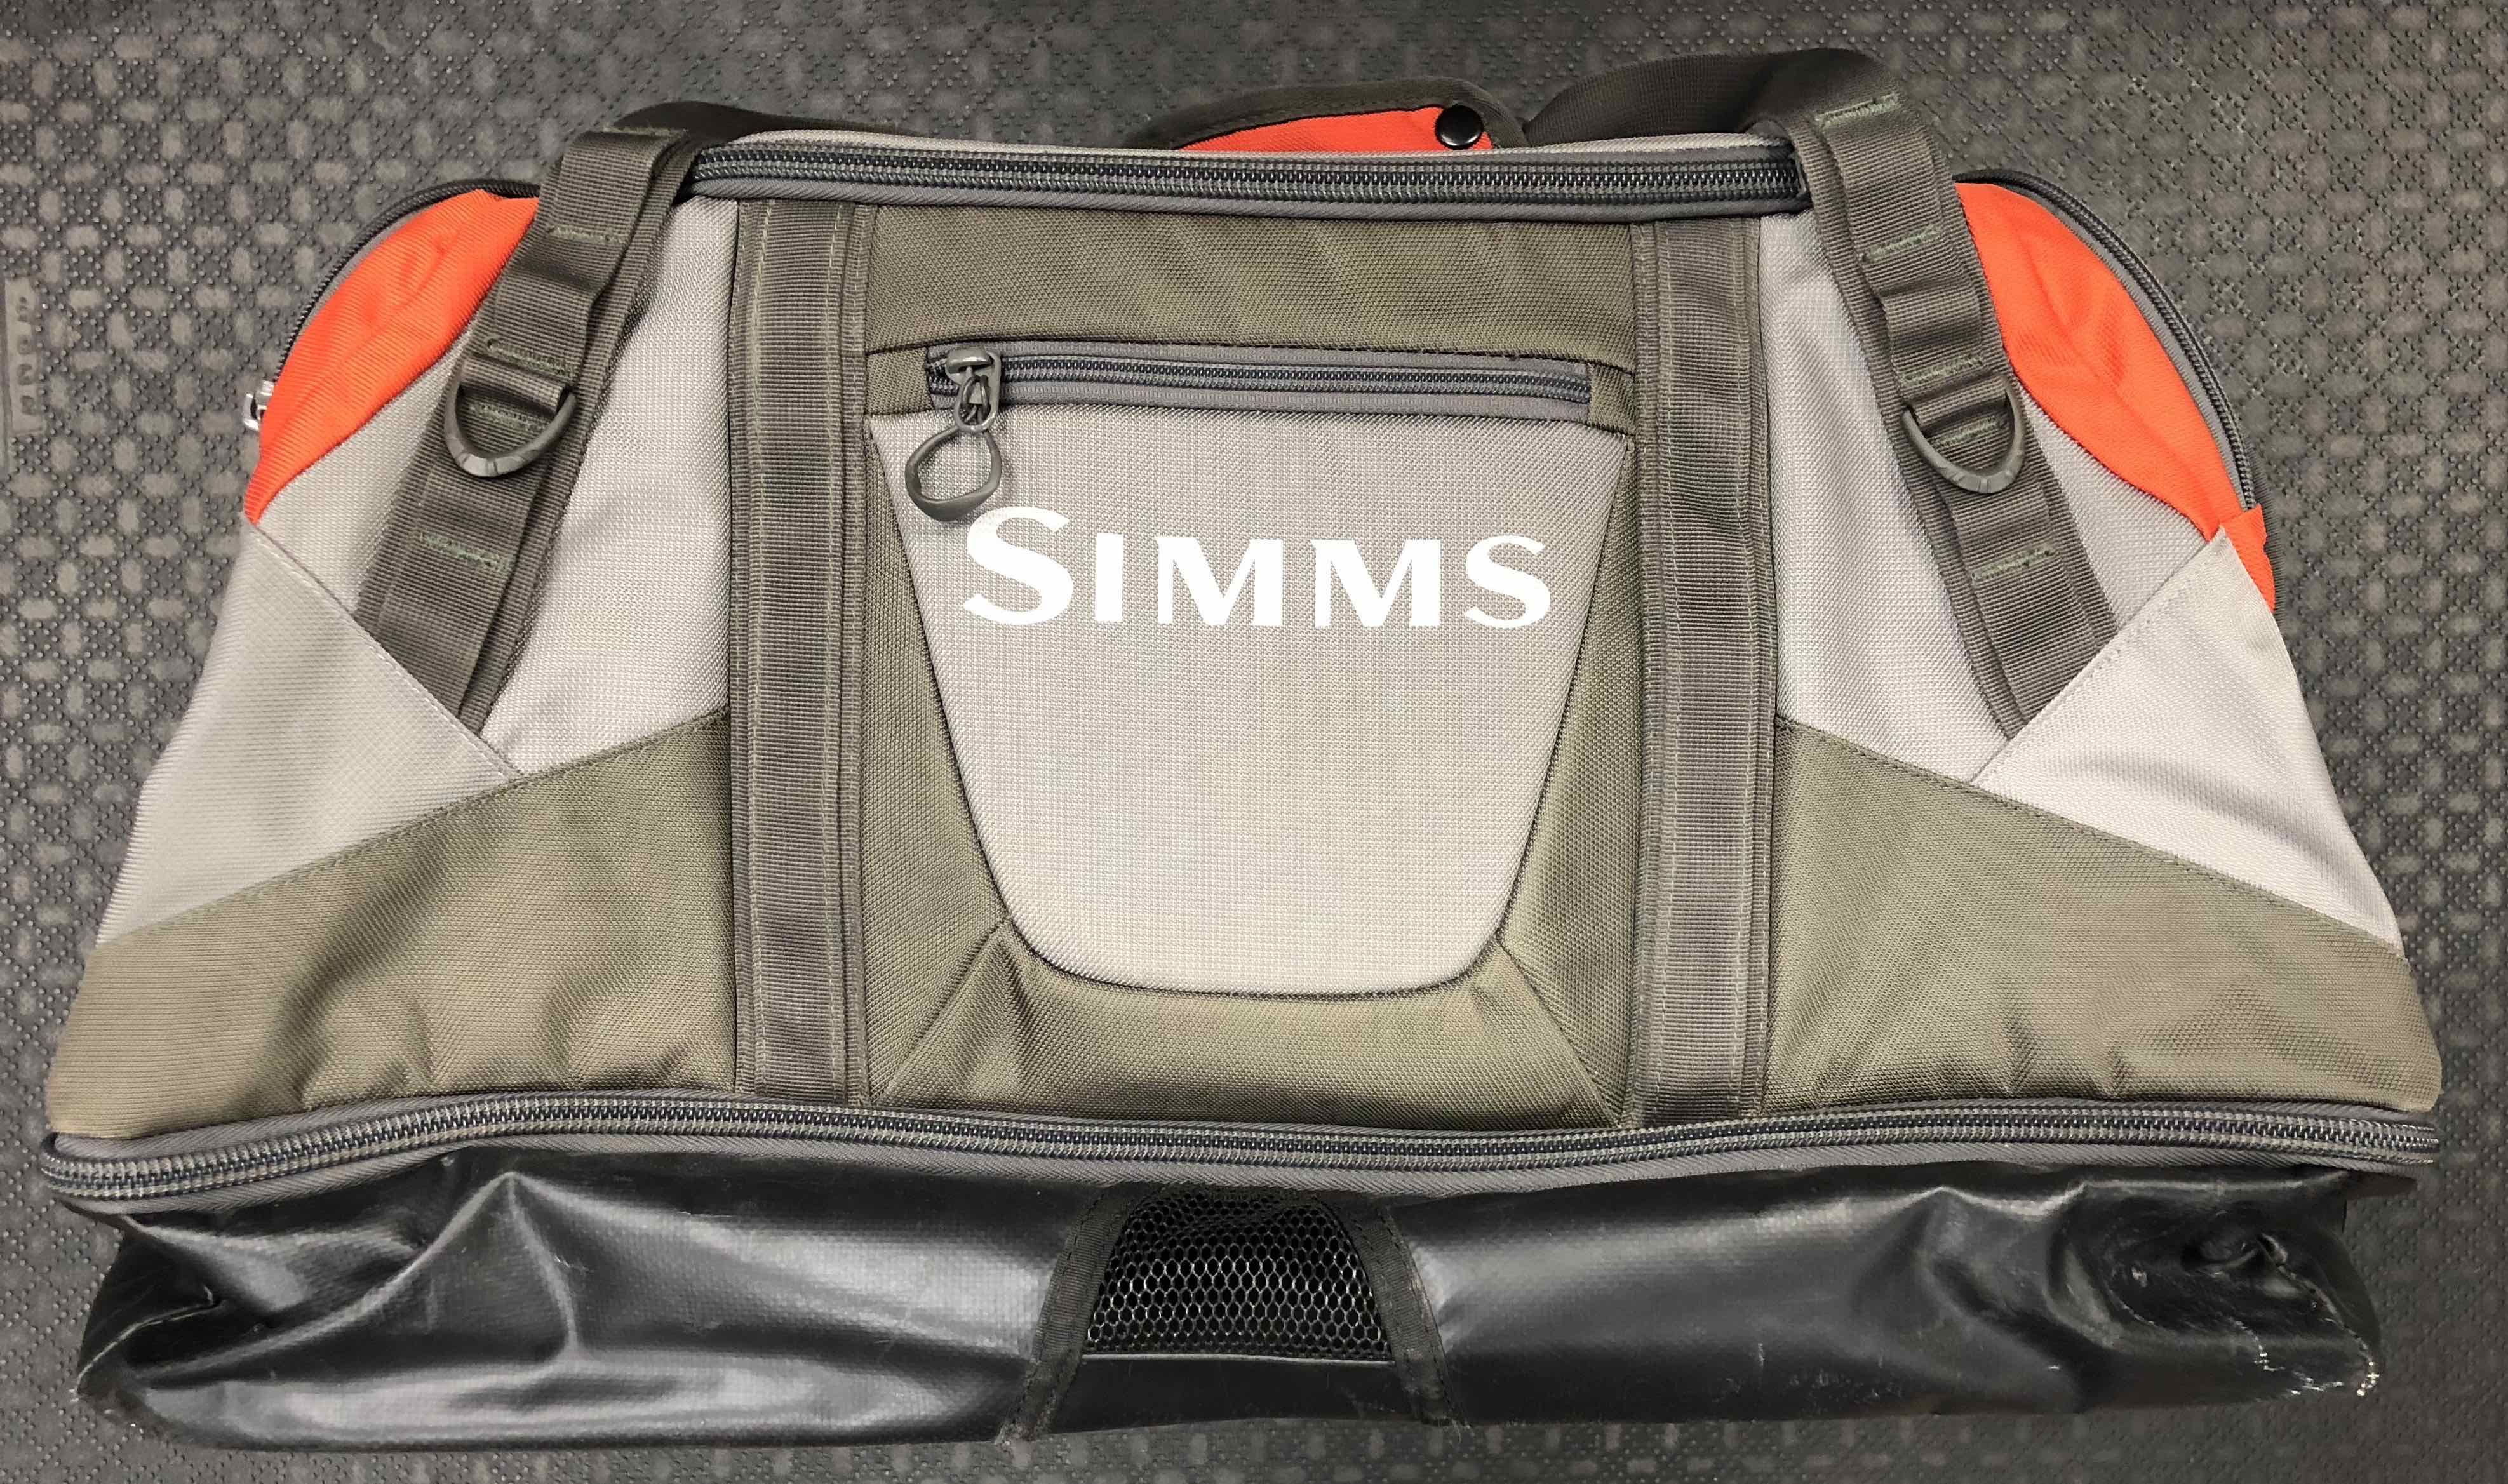 SOLD! – NEW PRICE! – Simms Headwaters Gear Bag – LIKE NEW! – $125